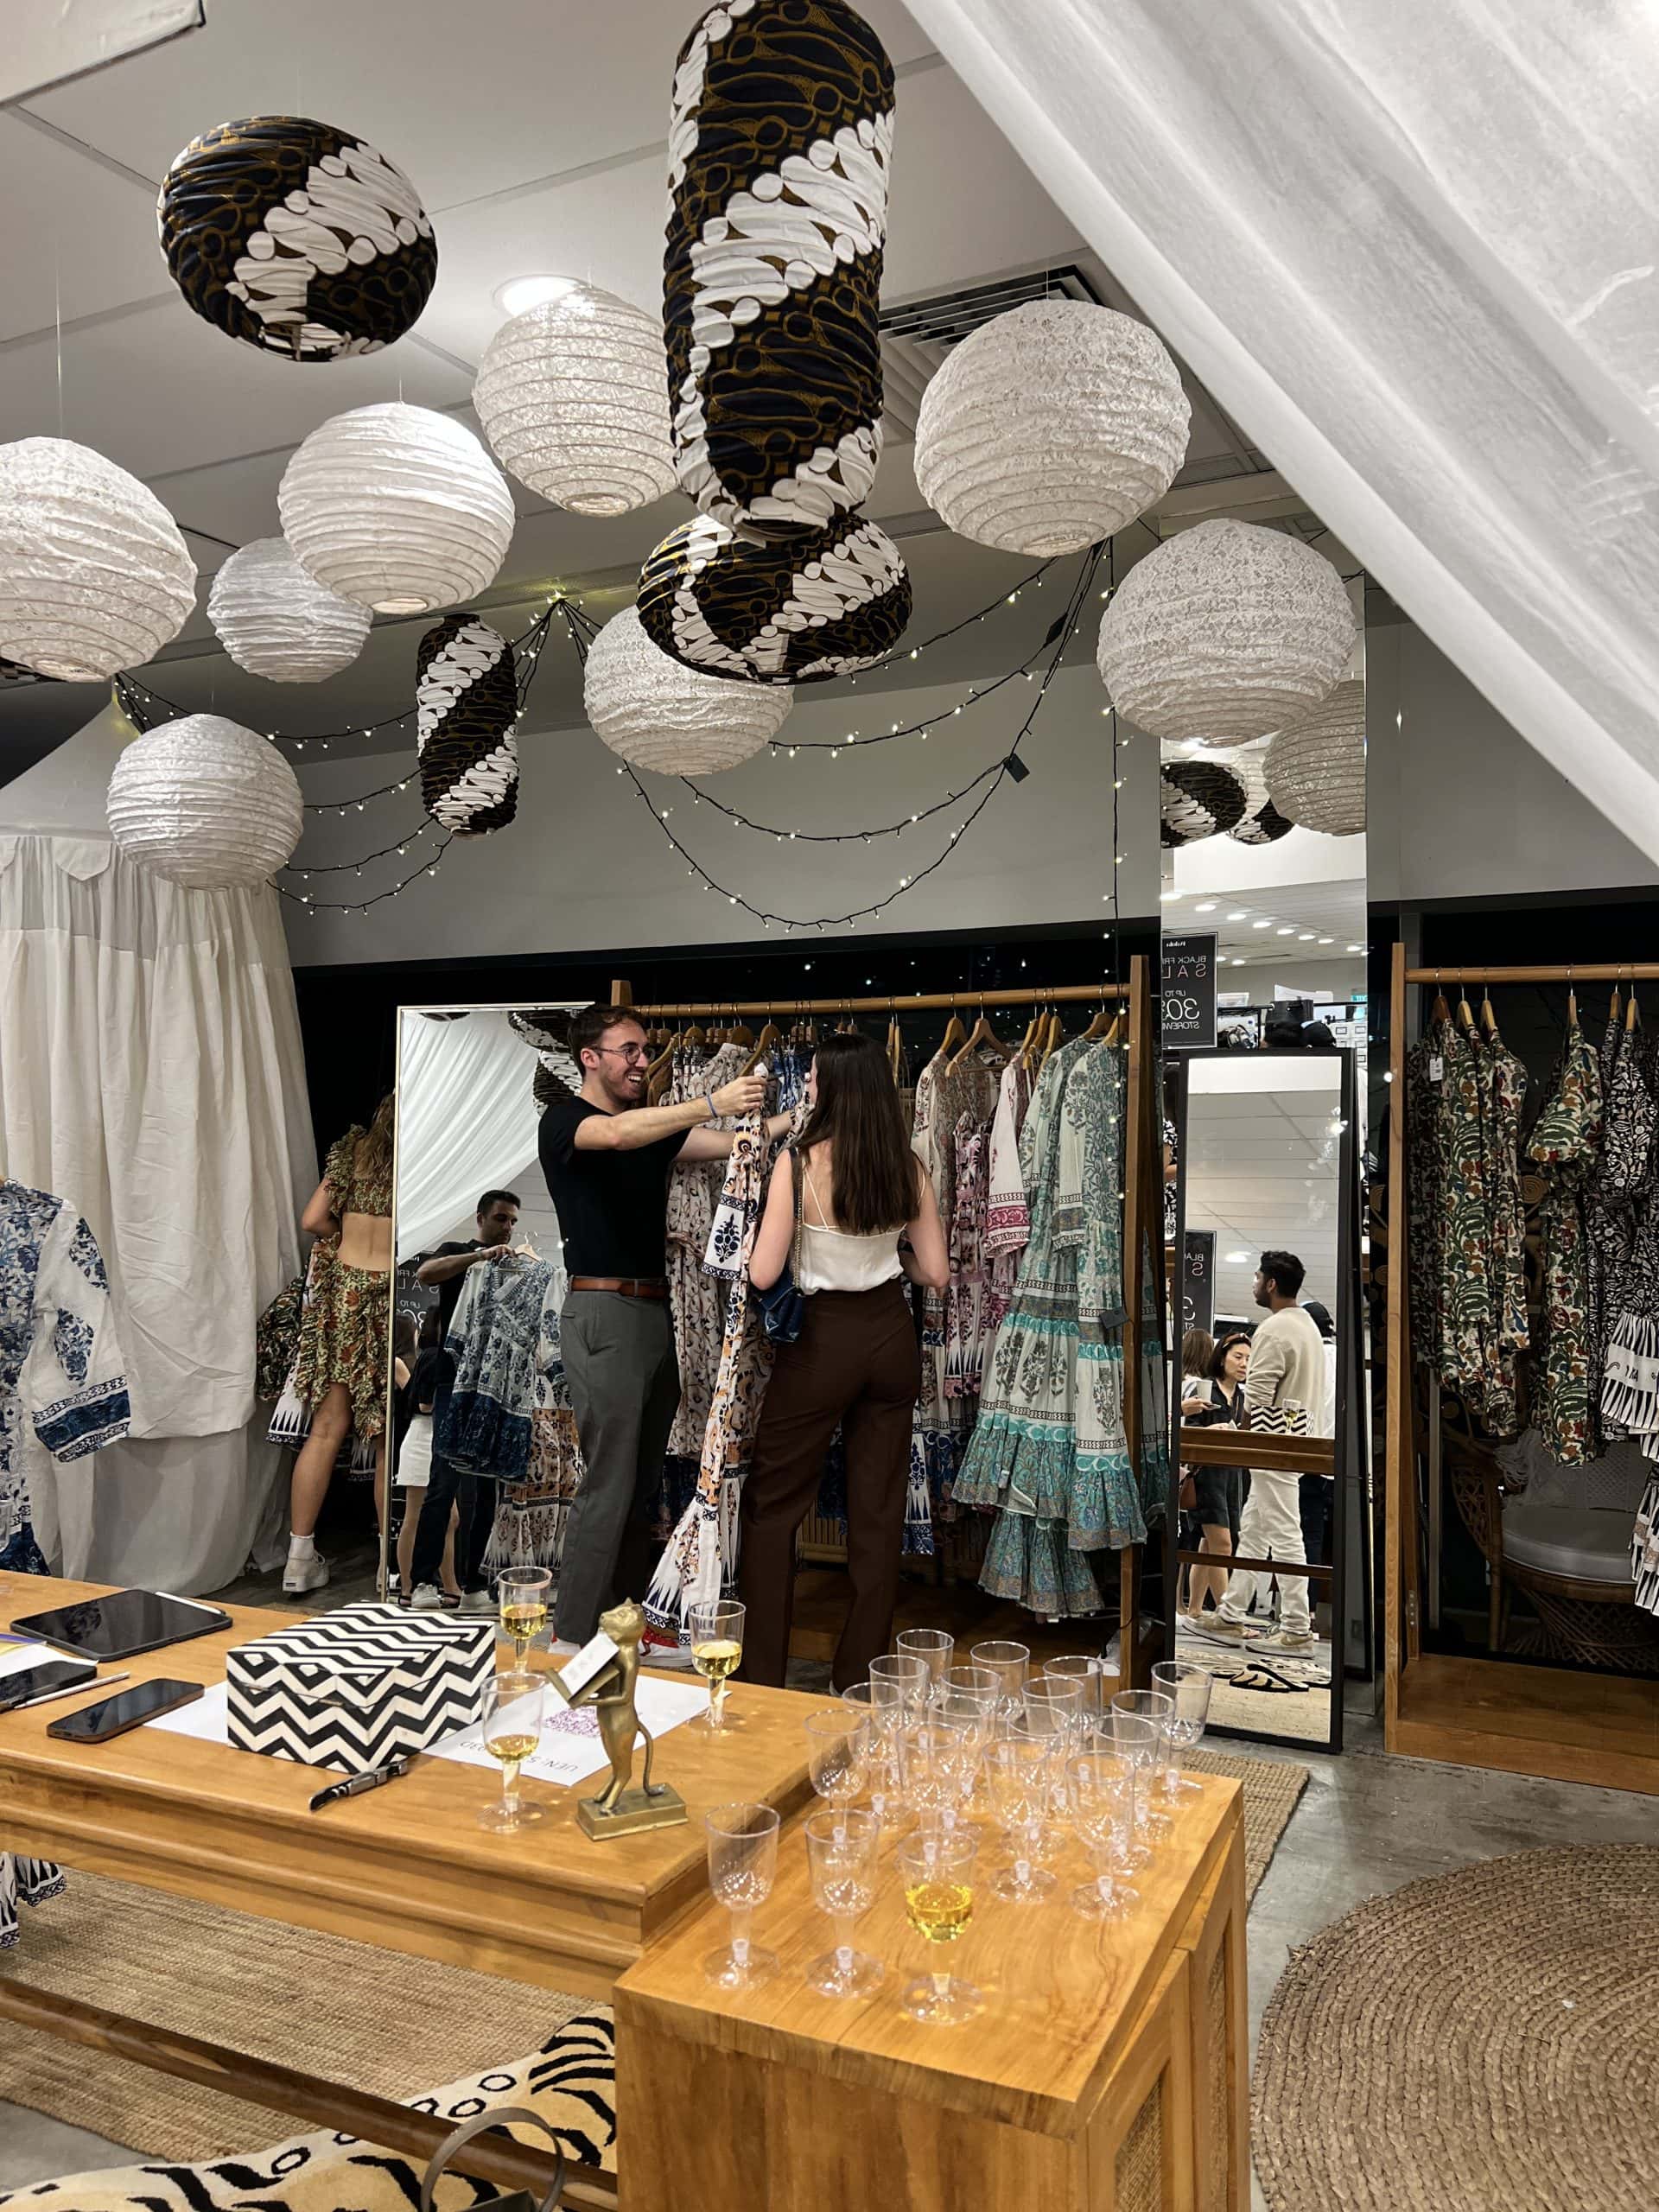 Boutique Fairs Singapore returns with over 240 fashion & lifestyle brands for all your festive gift-shopping needs from now till 27 November 2022